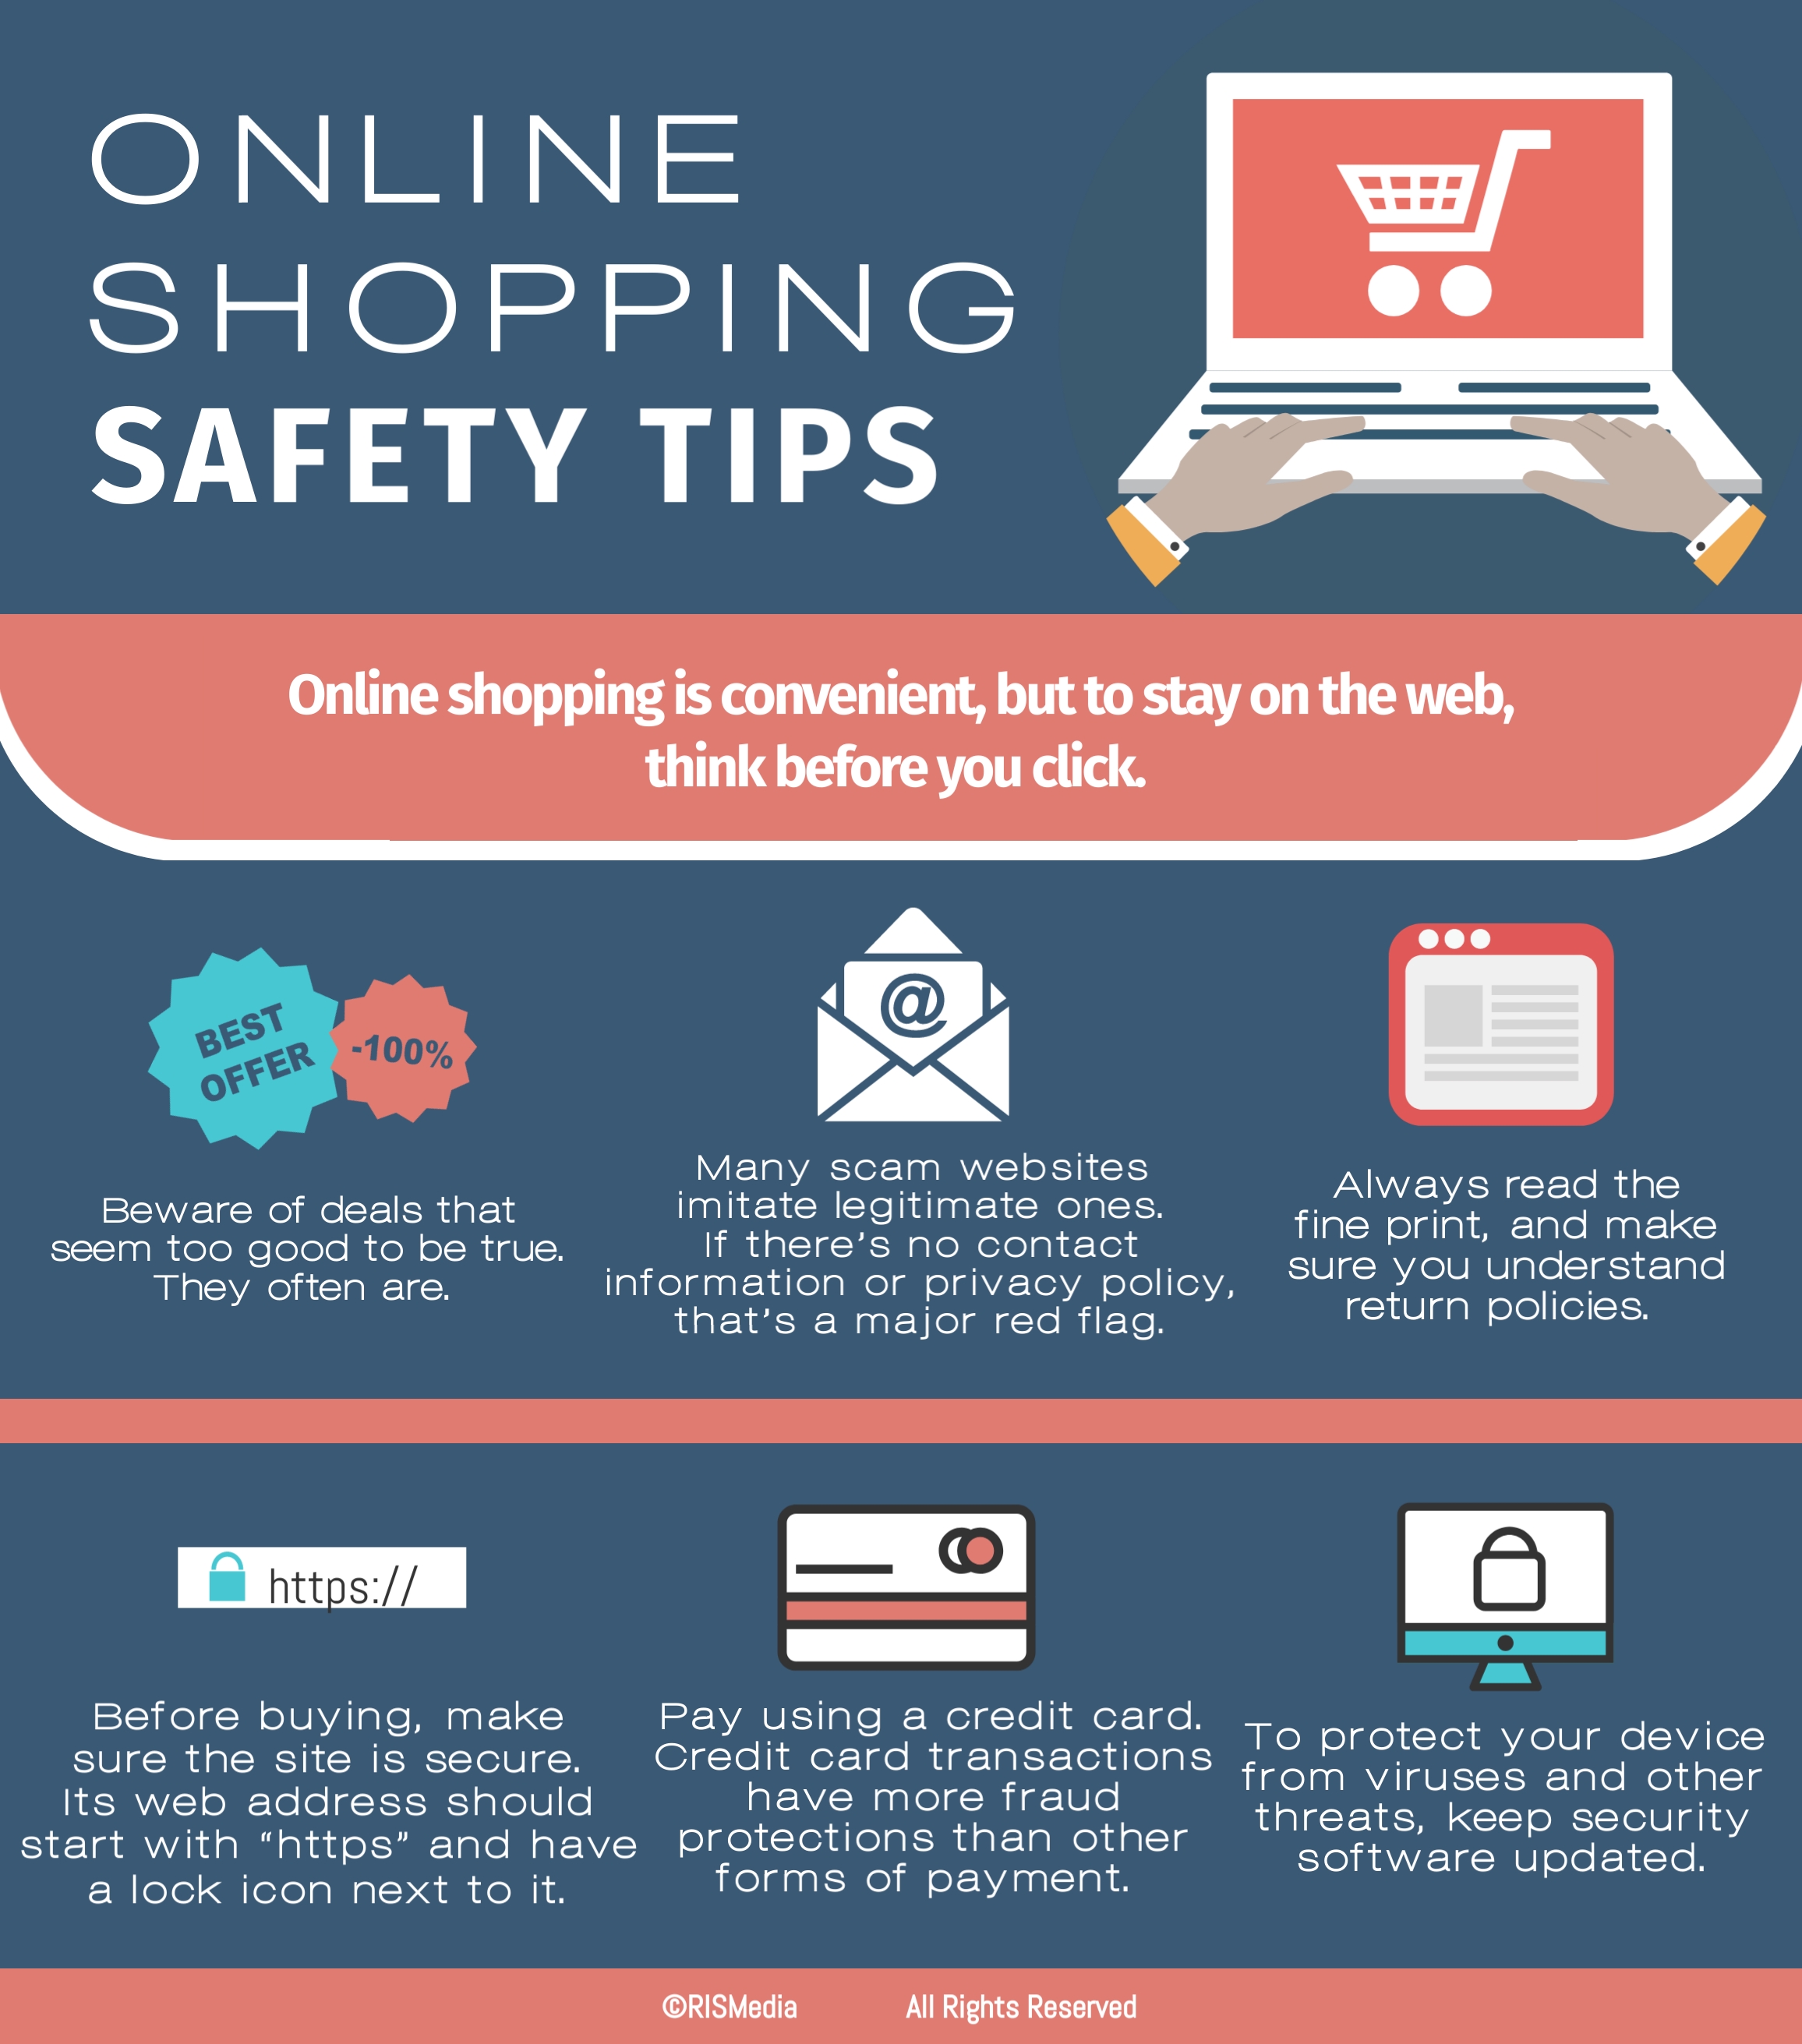 How Safe is Online Shopping